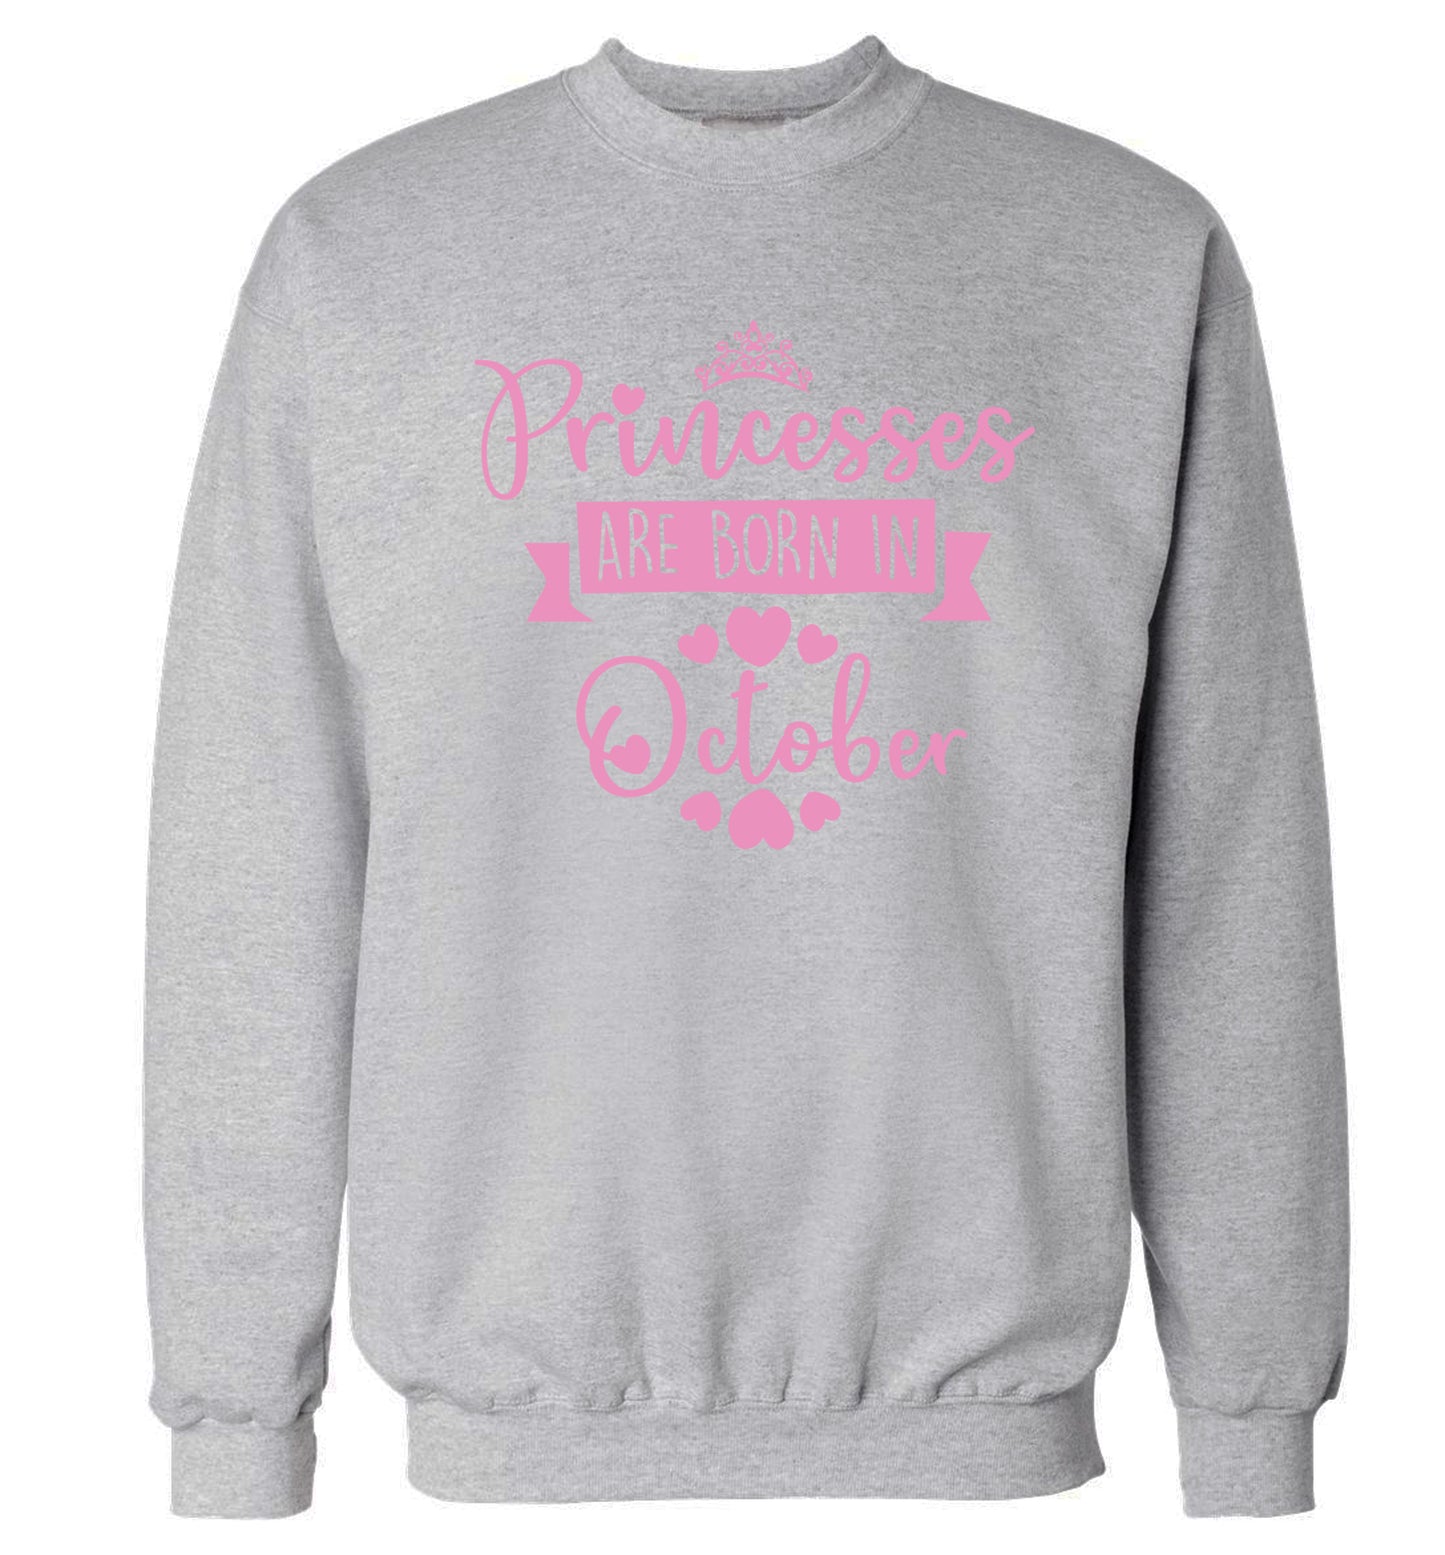 Princesses are born in October Adult's unisex grey Sweater 2XL